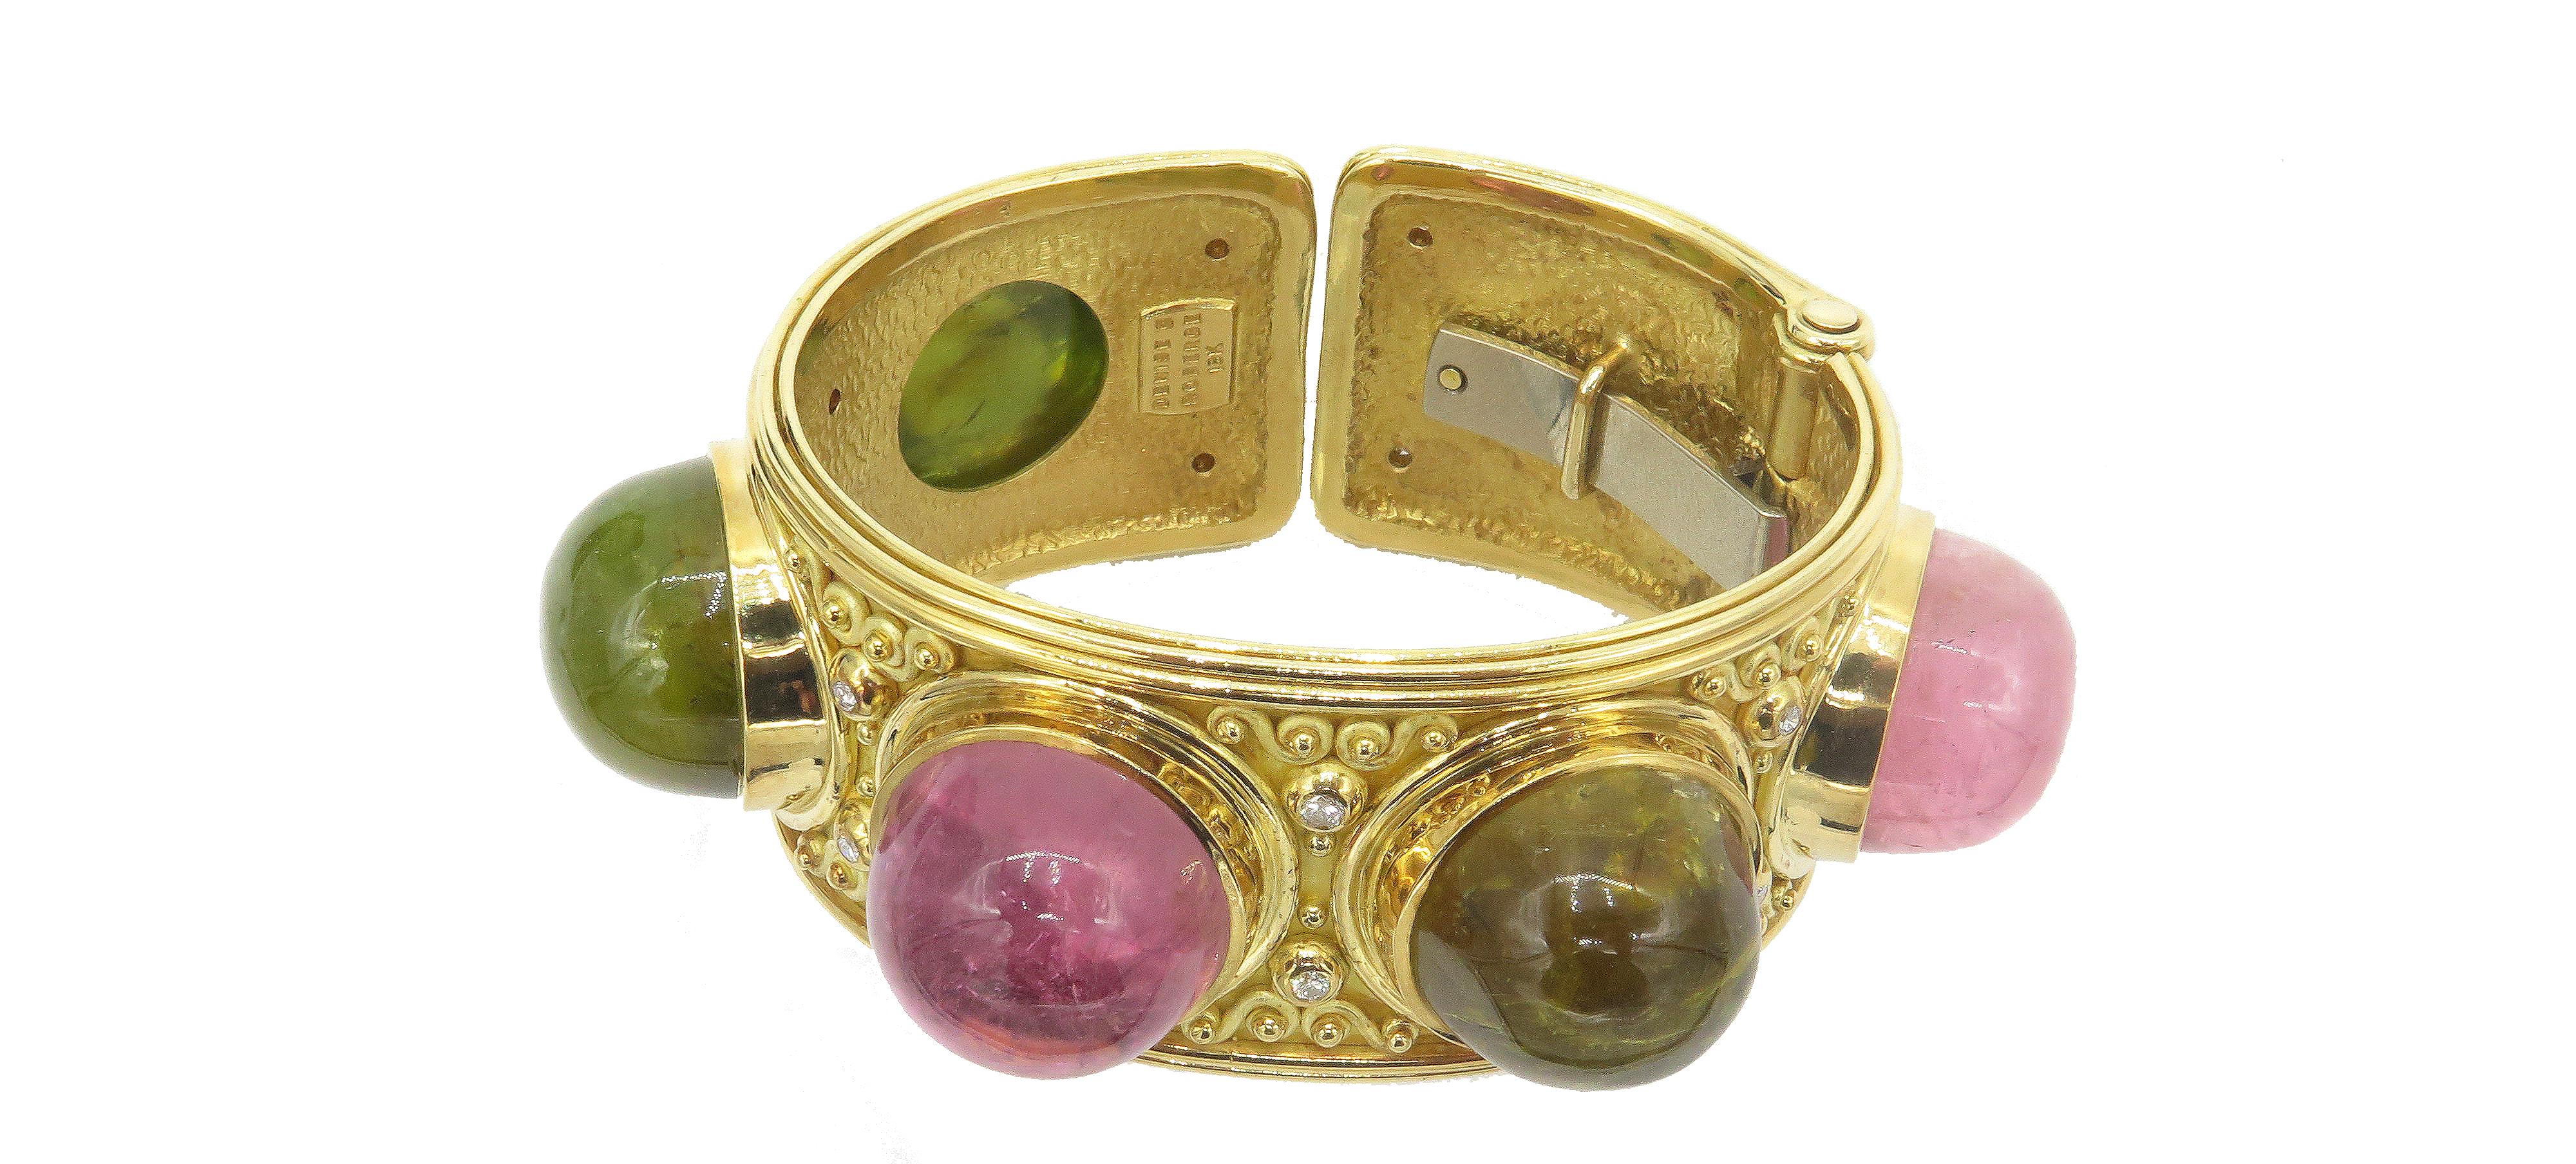 A, beautiful wide cuff bracelet from Denise Roberge, set in 18kt yellow gold featuring an array of multi colored cabochon Tourmaline's. This beautiful creation by Denise Roberge weighs approx 183.8 grams and is 2.5